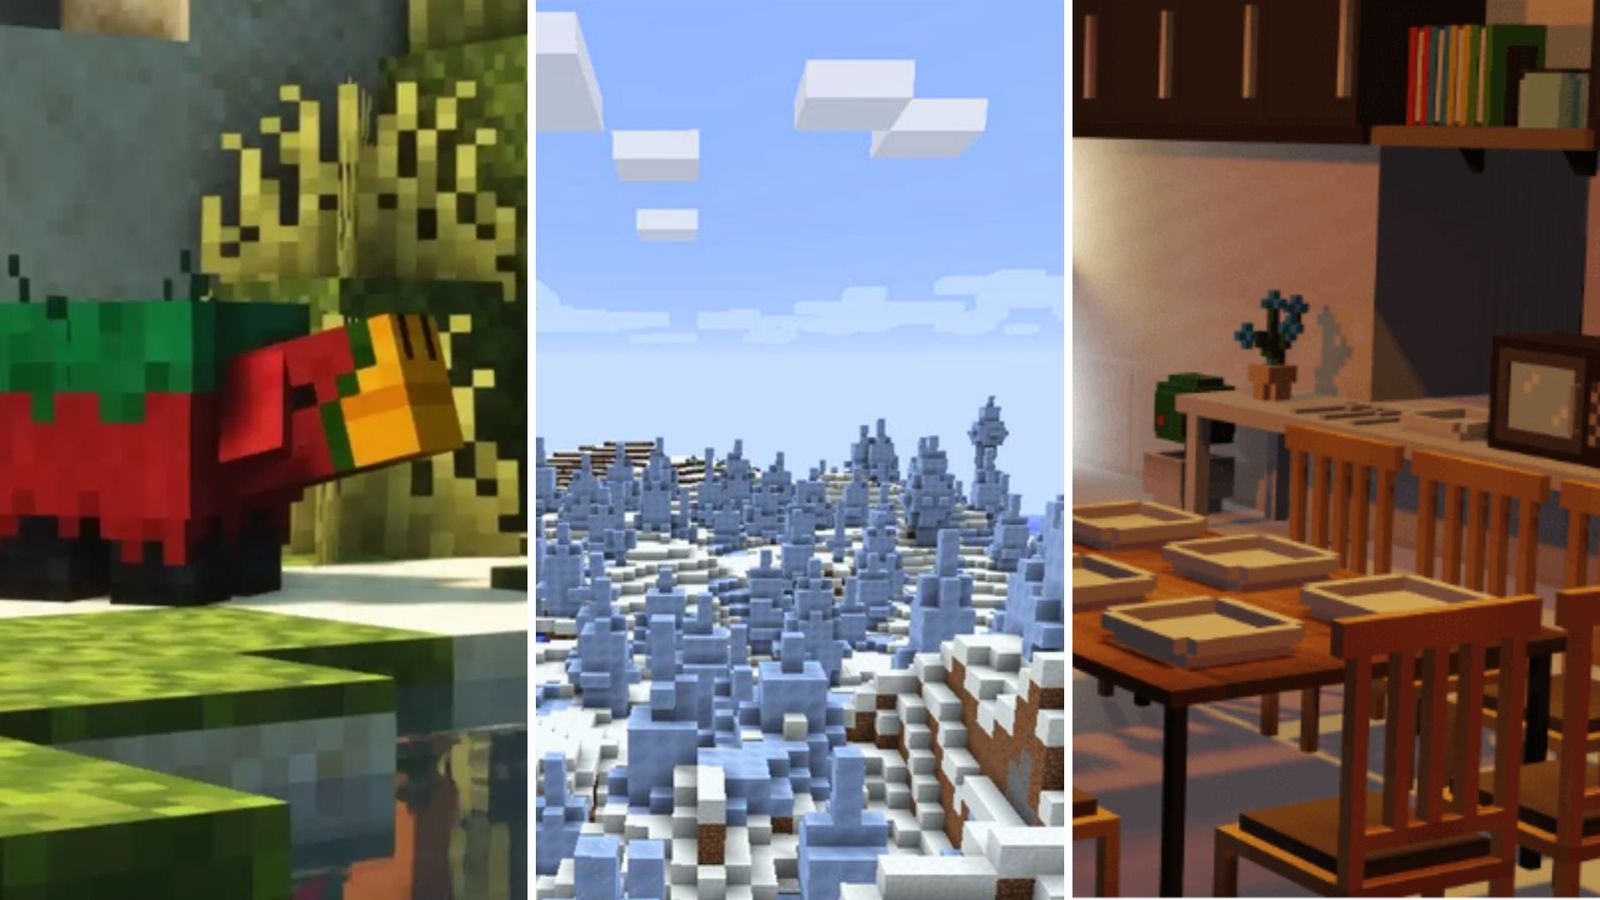 A Minecraft Sniffer, icy biome, and furniture.